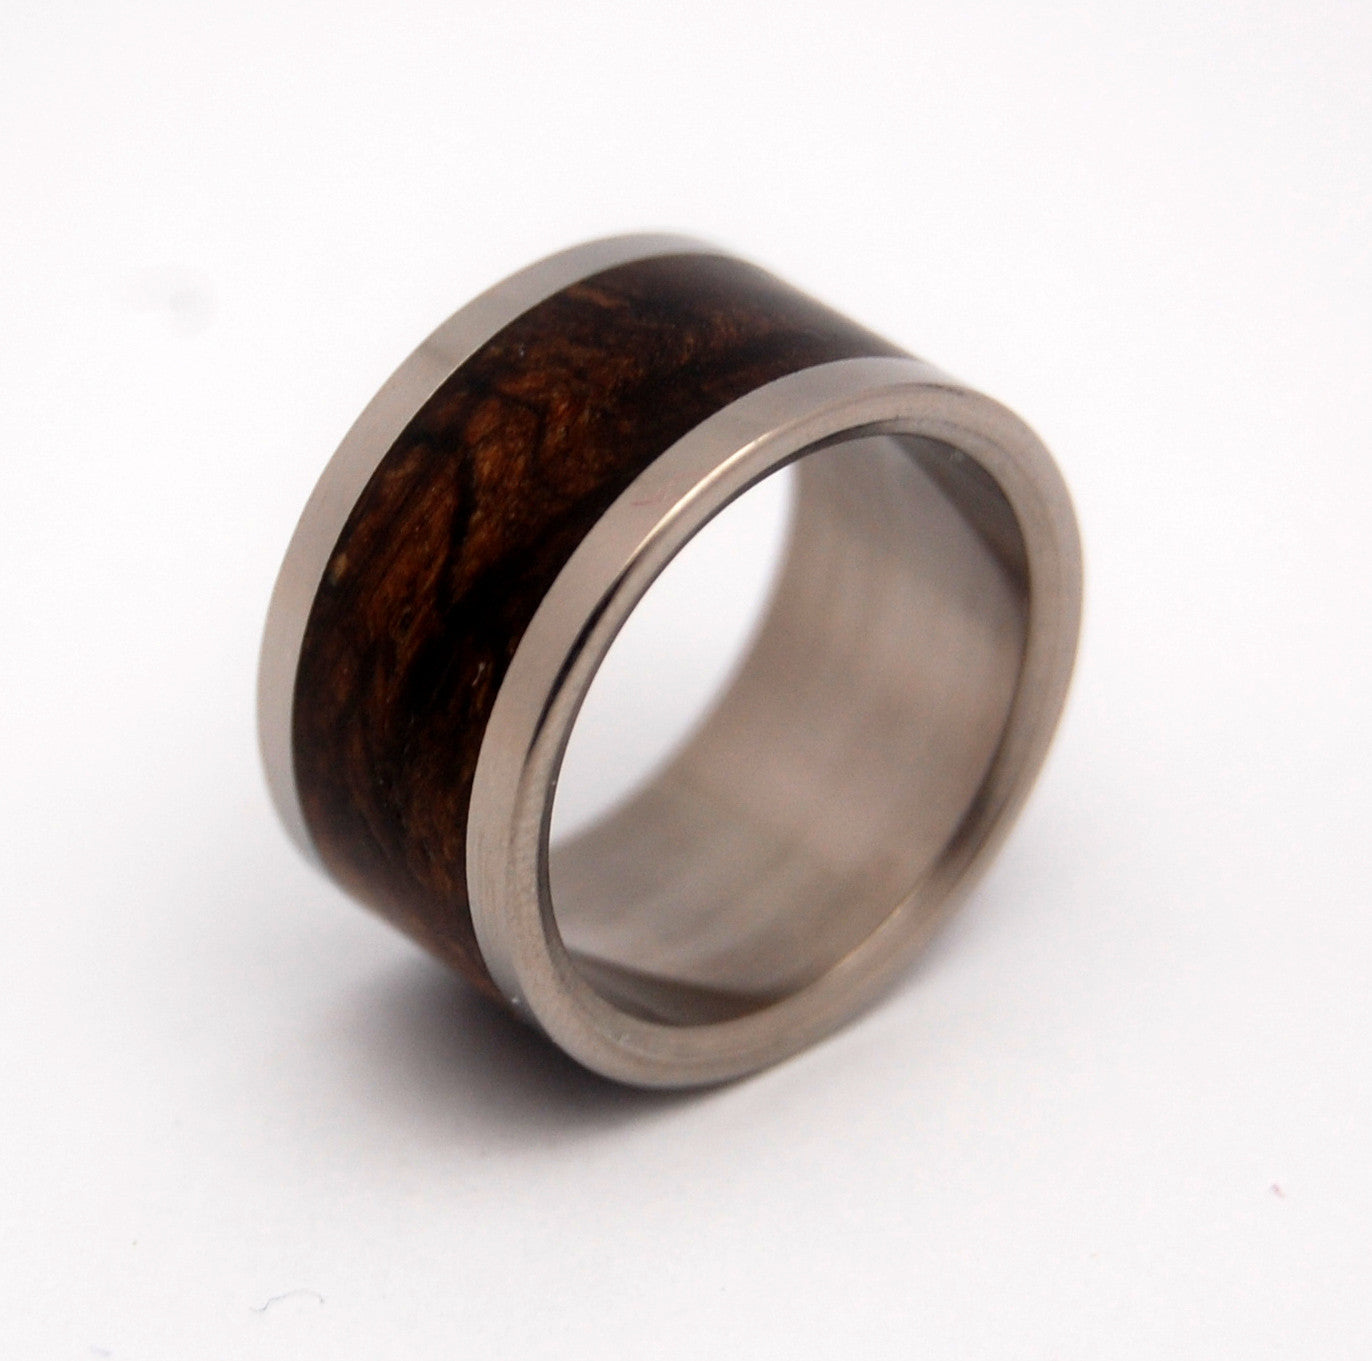 Owl | Handcrafted Titanium and Wood Wedding Rings - Minter and Richter Designs